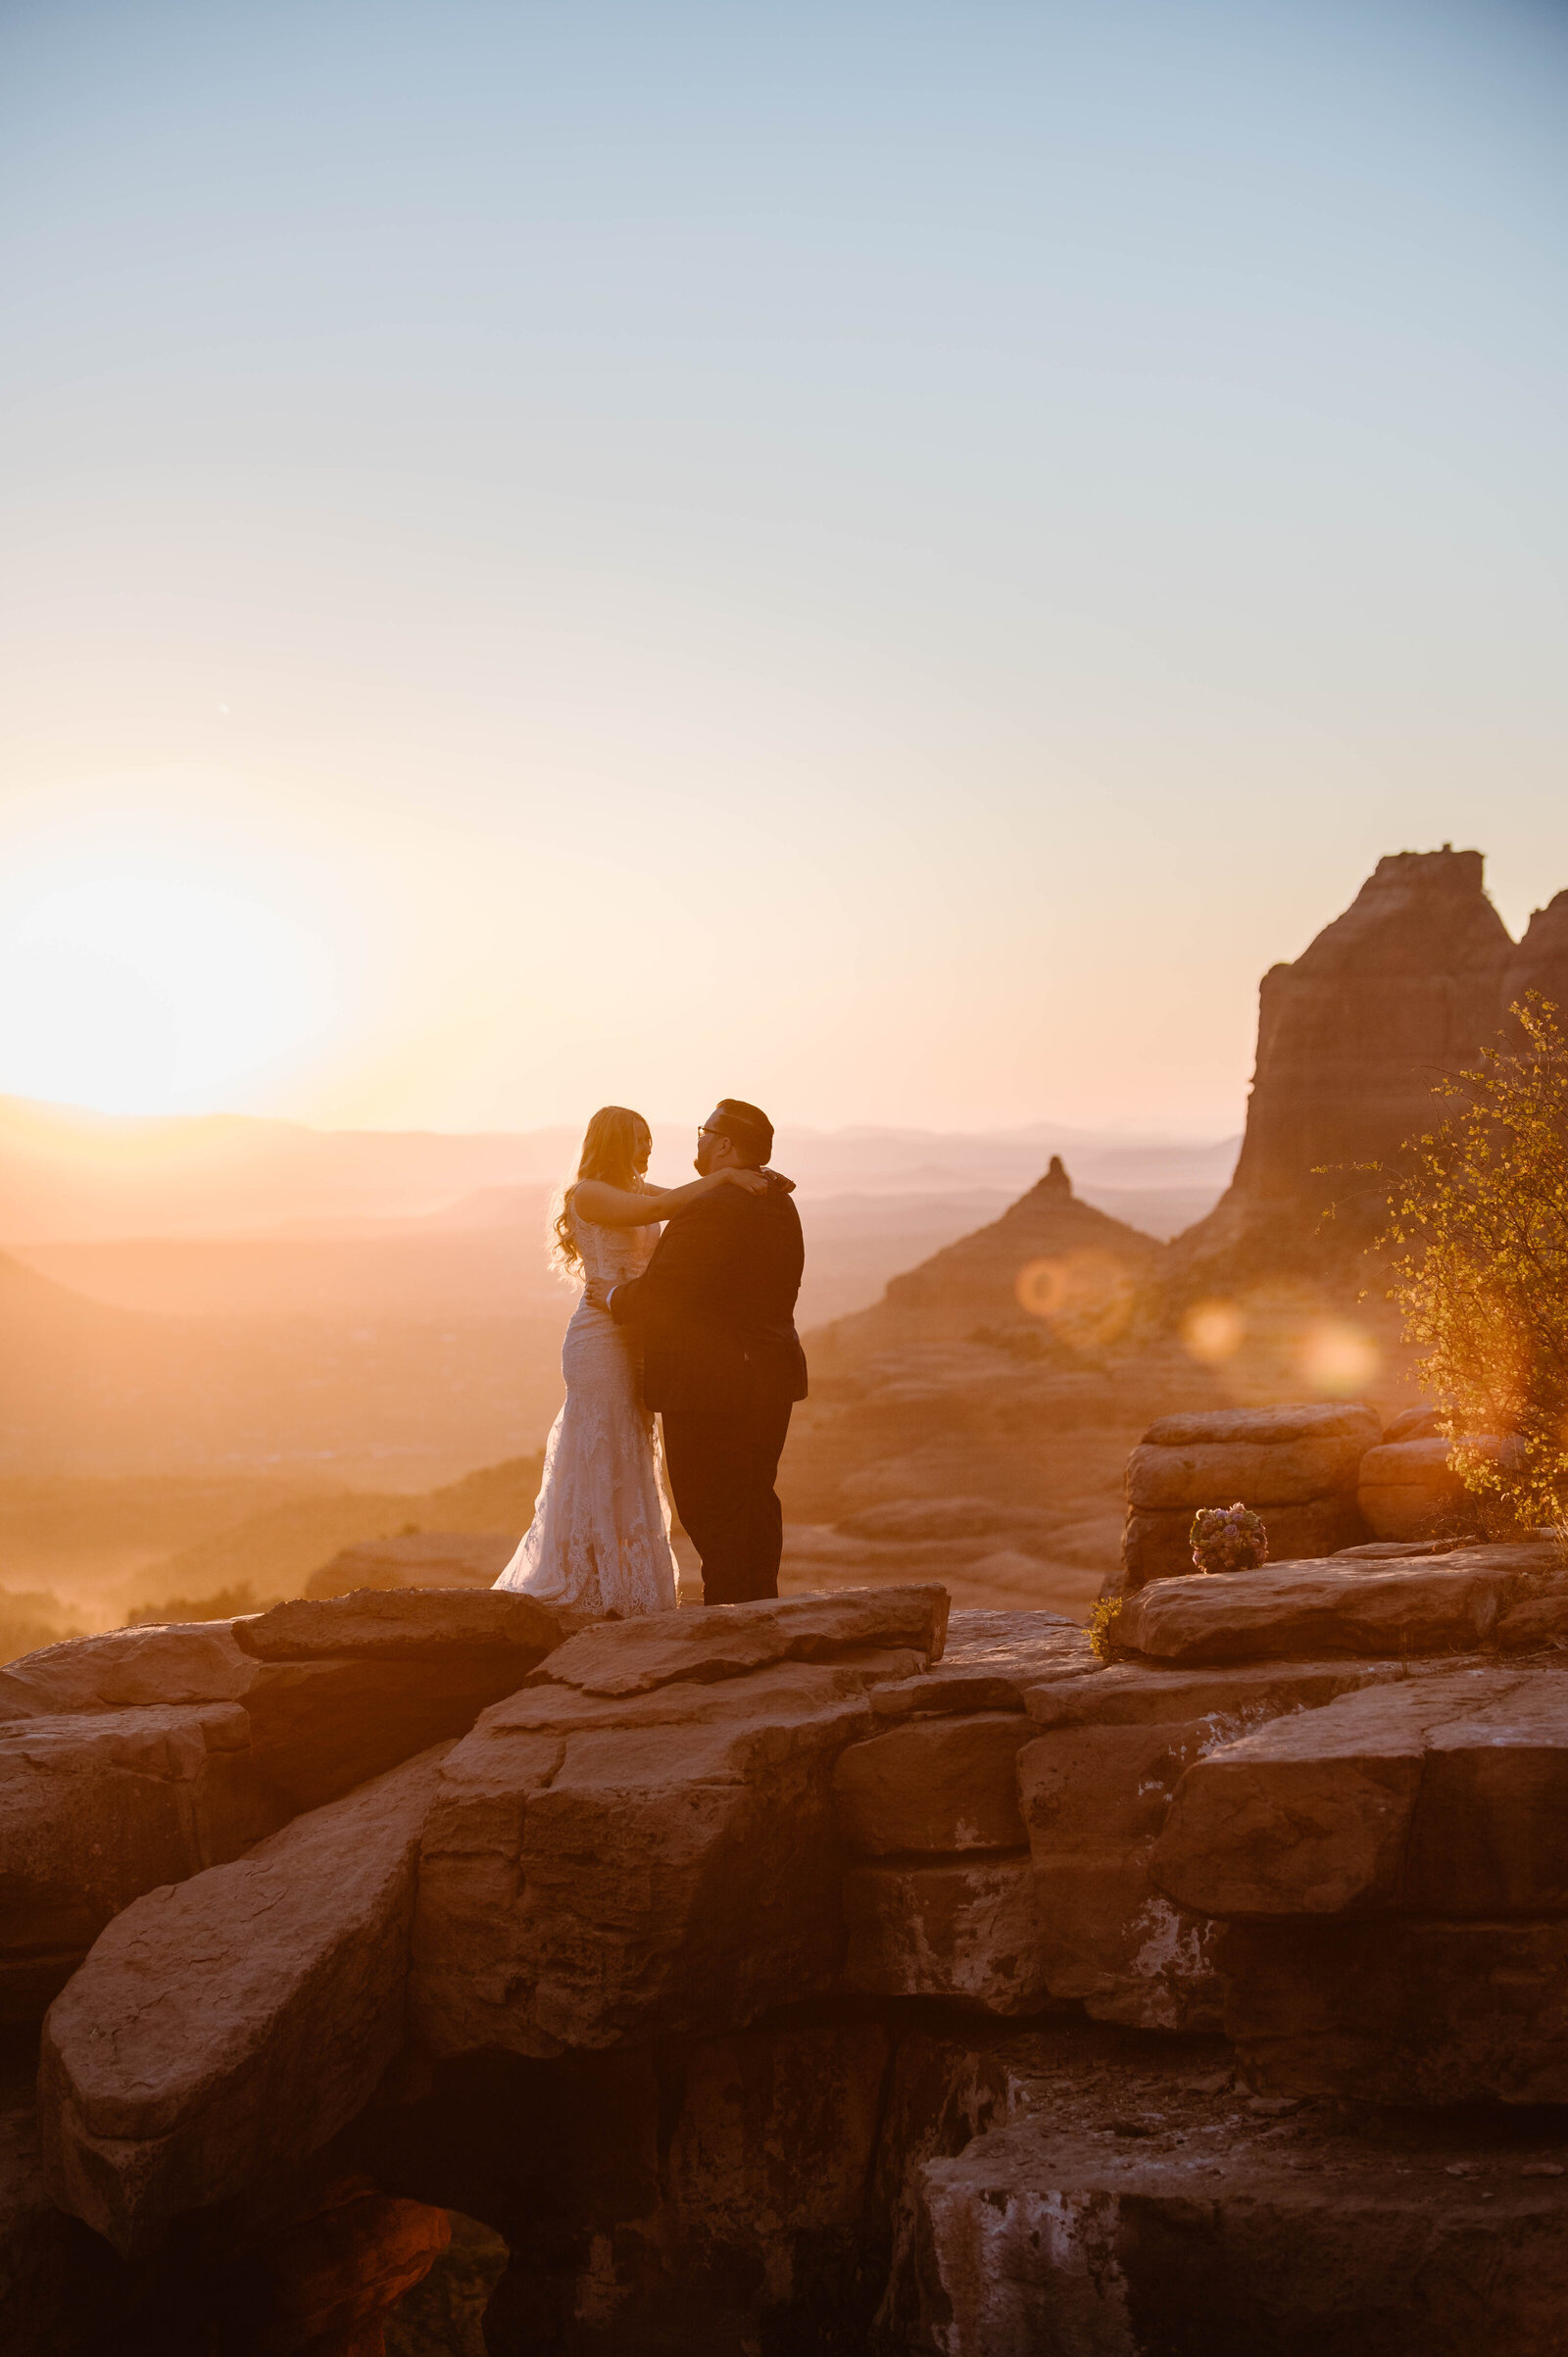 Looking for a "how to" elope in Sedona? Click here.